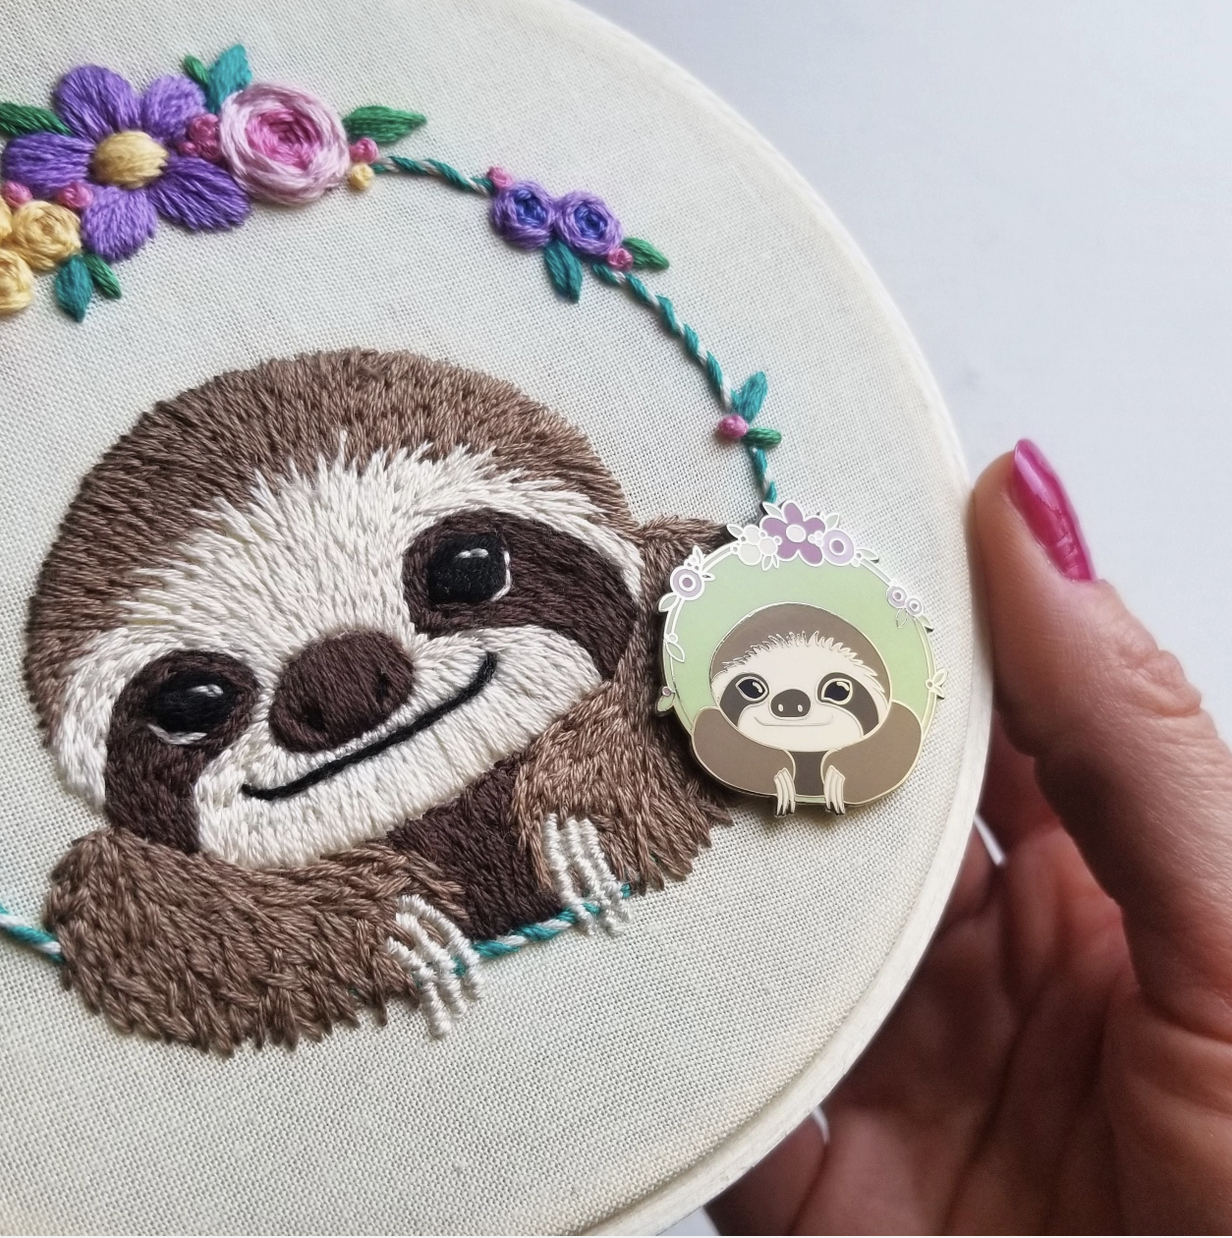 Jessica Long Embroidery | Smiling Sloth Embroidery Kit